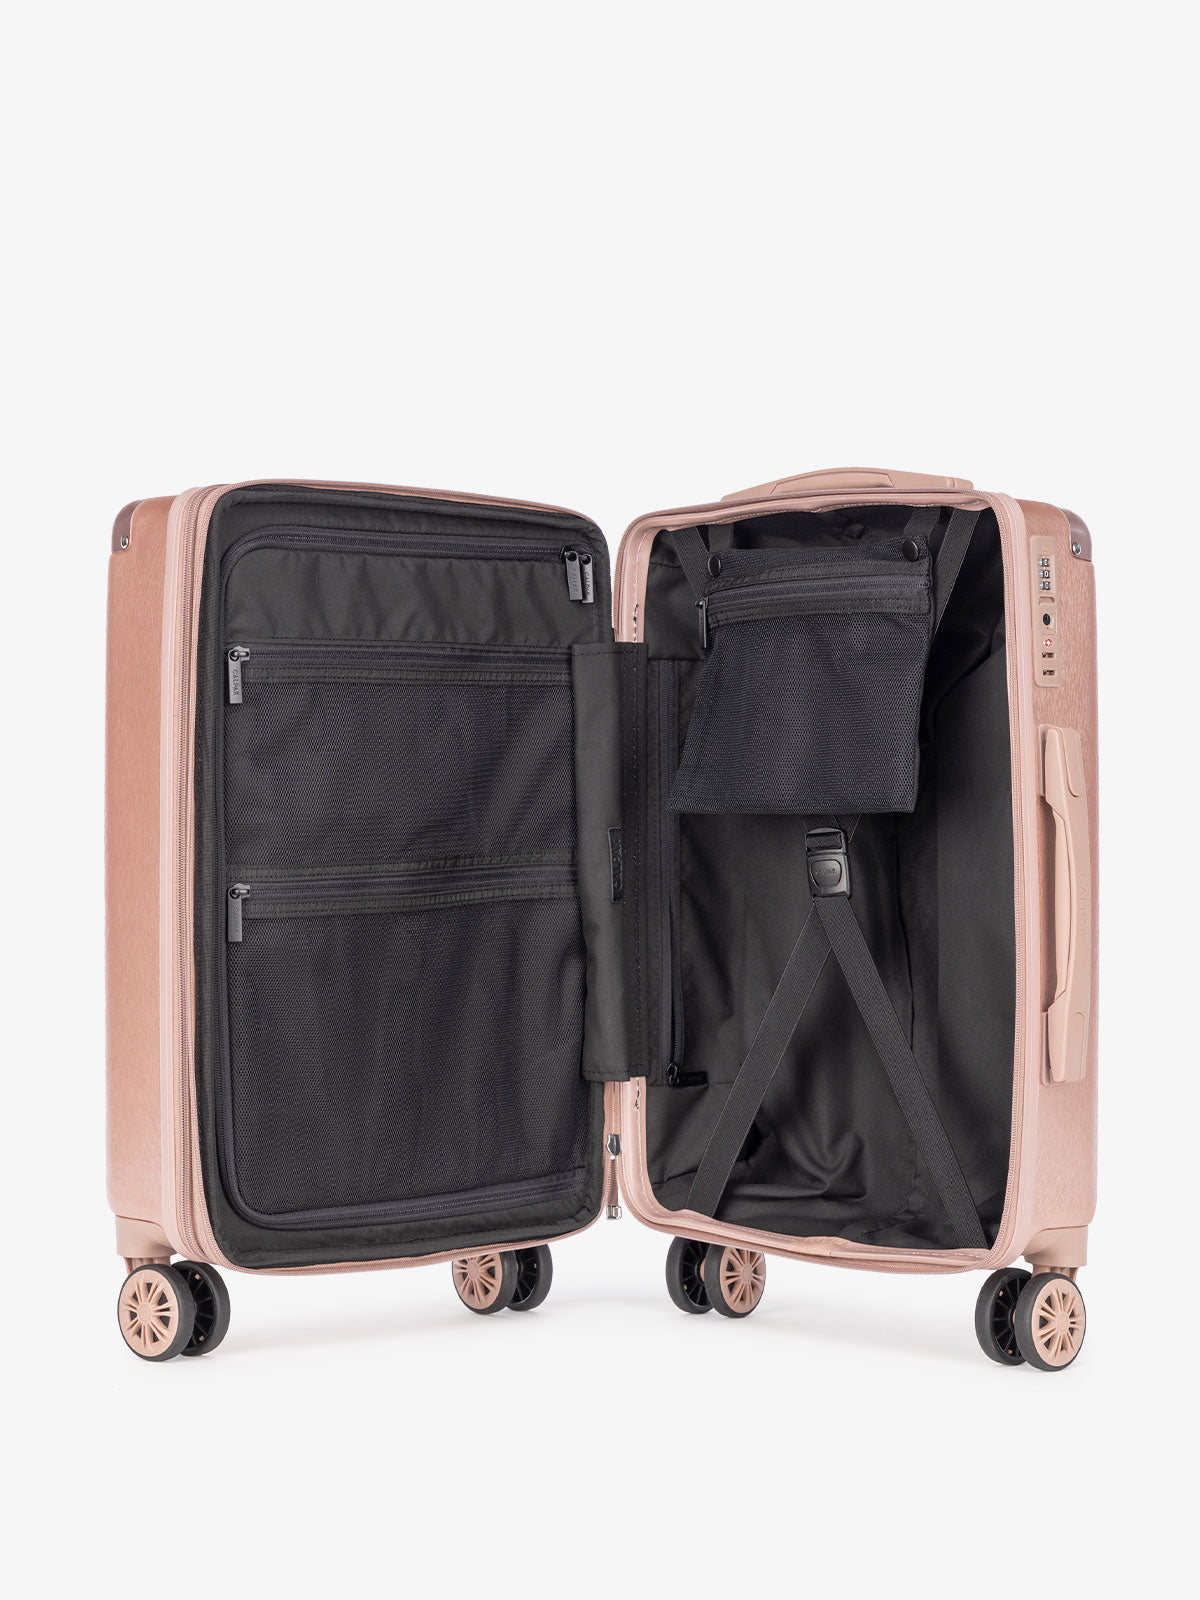 CALPAK Ambeur rose gold large 30 inch luggage with compression straps